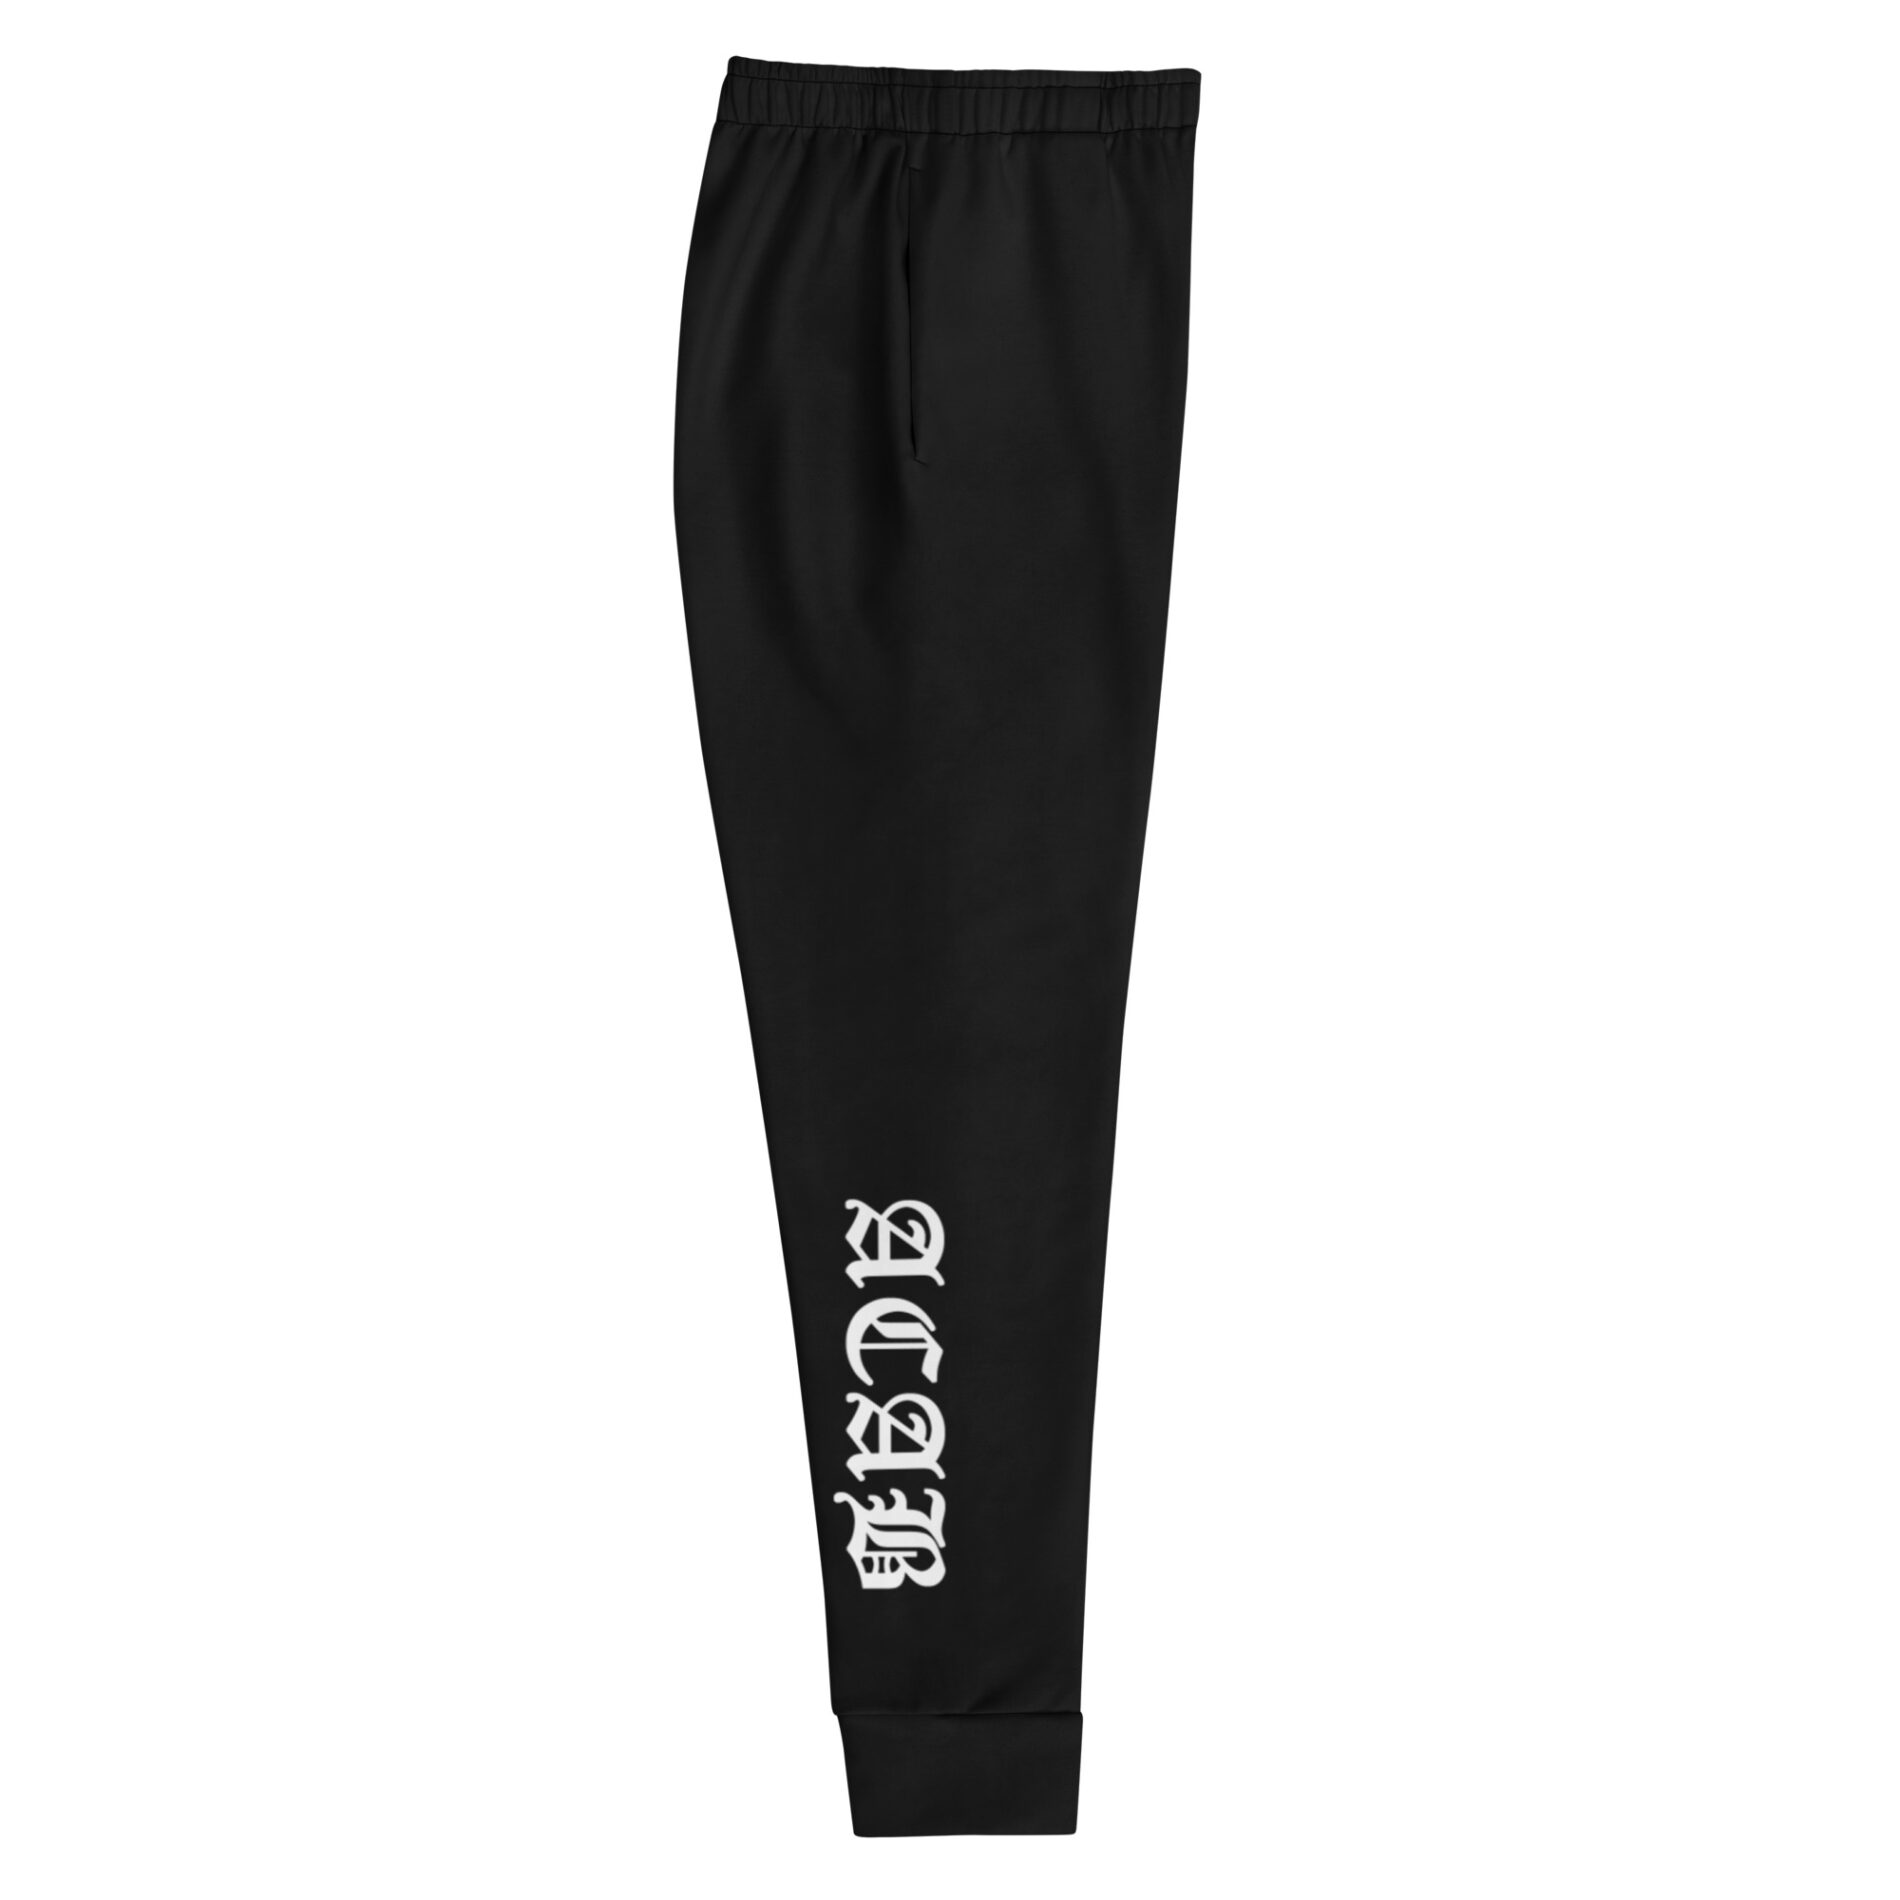 ACAB All Cops Are Bastards Women's Joggers Bottoms